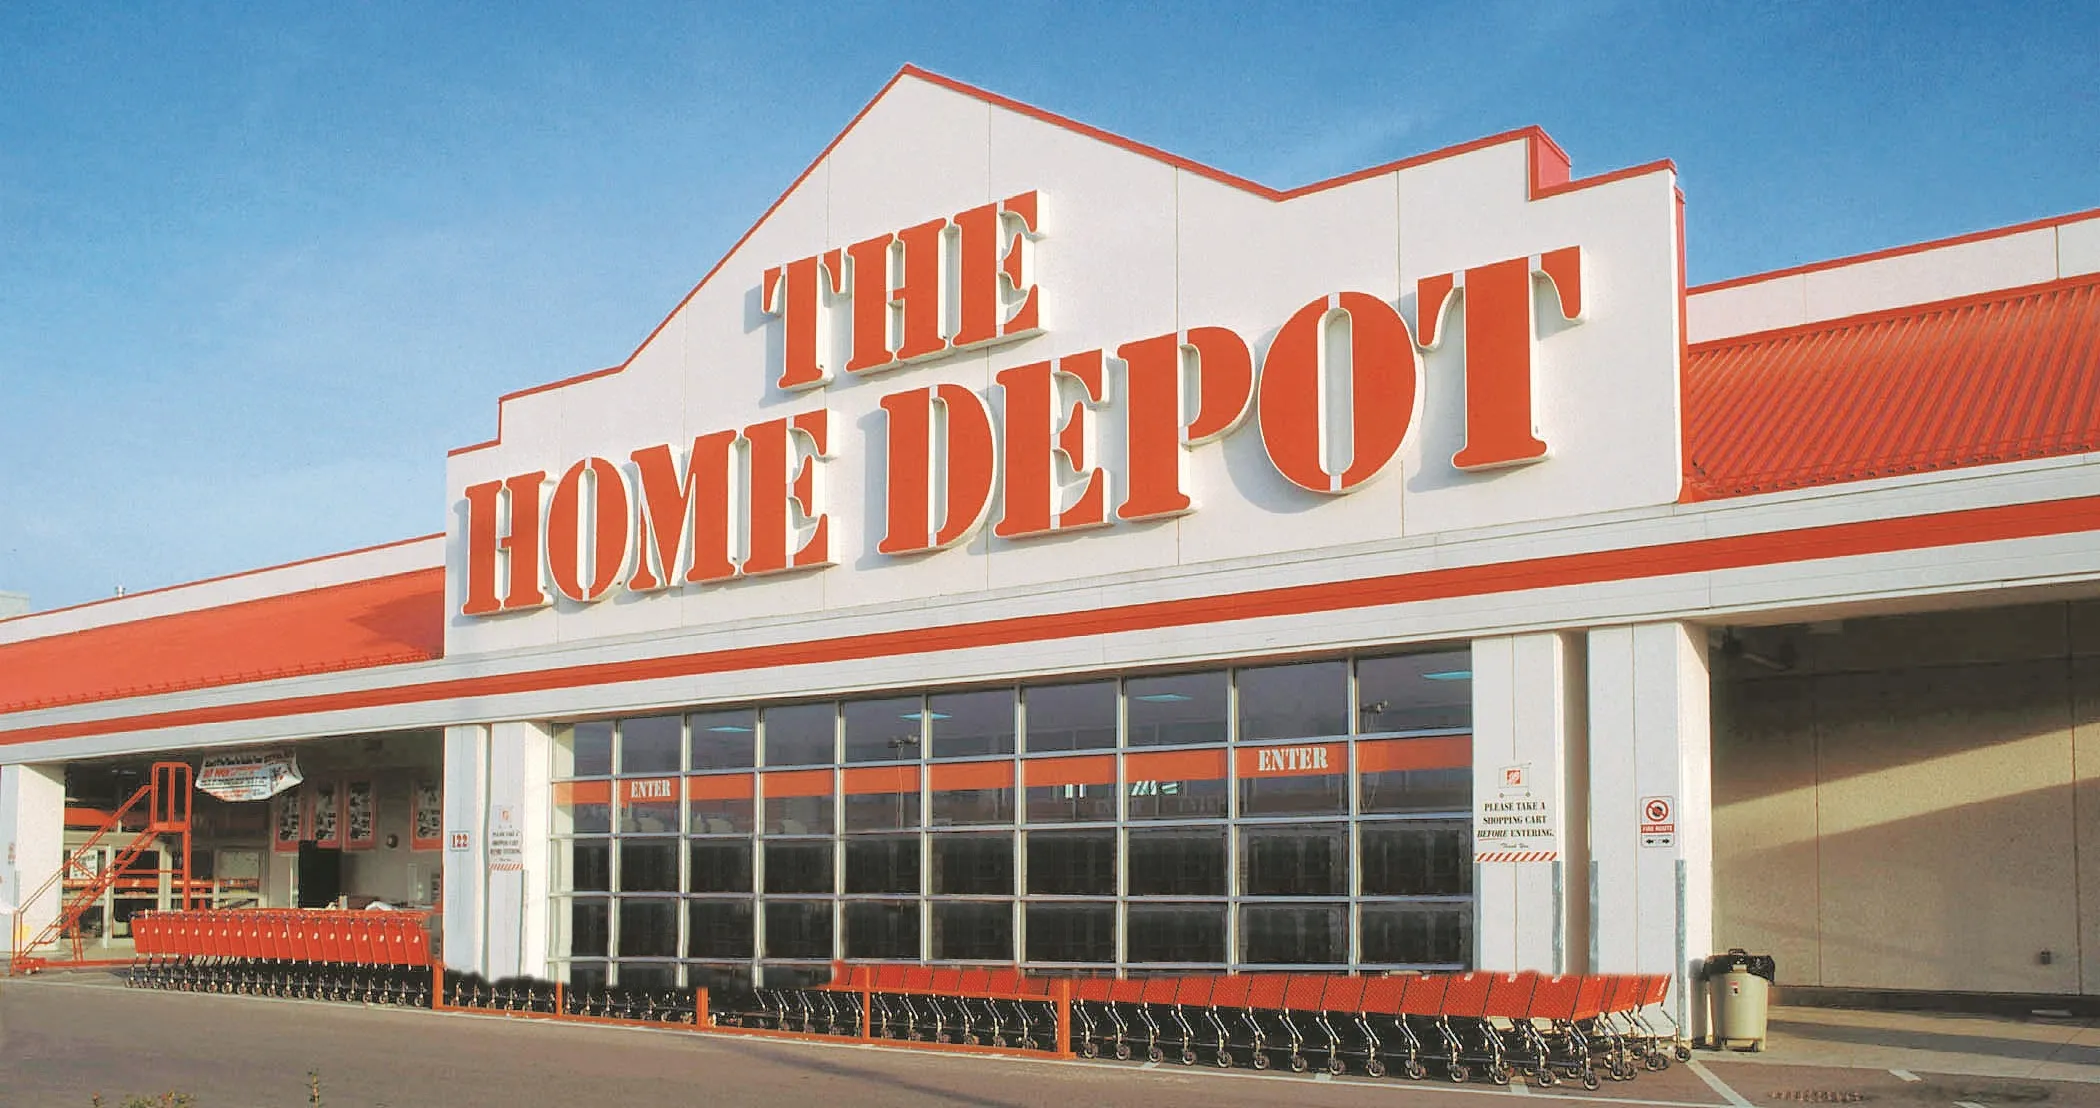 The home depot outcomes